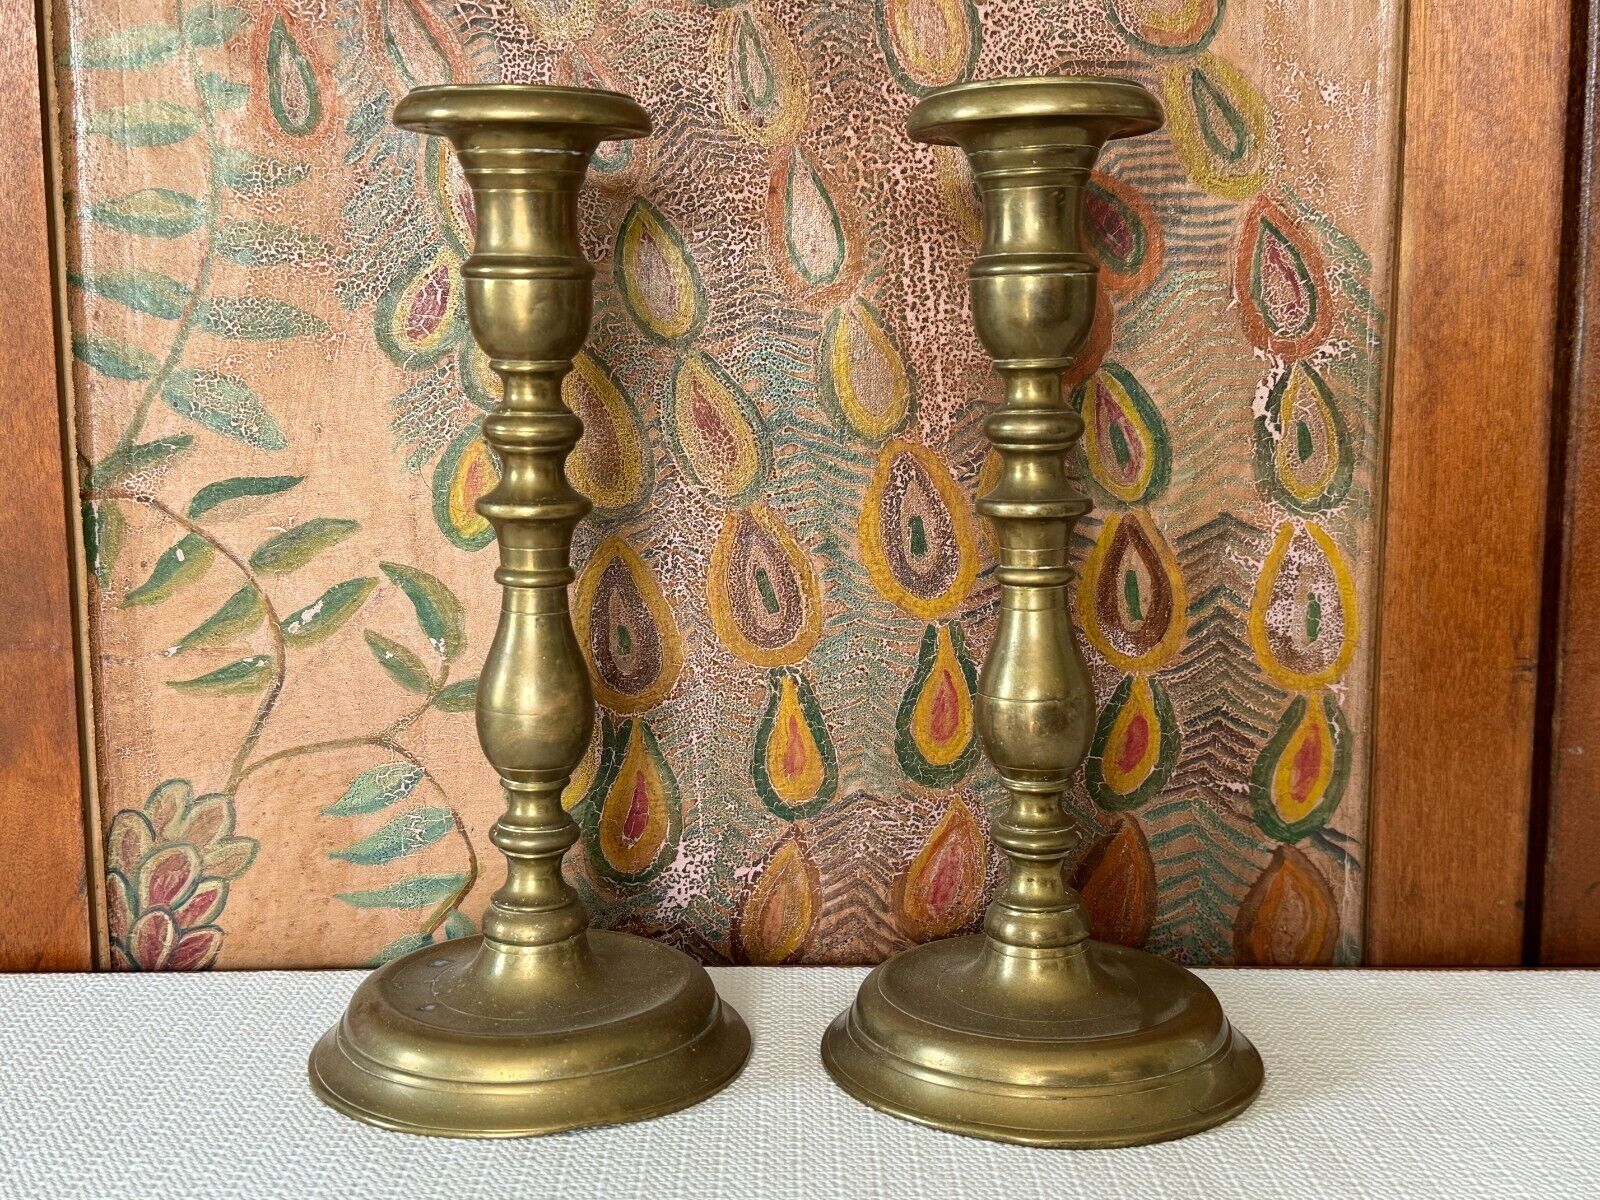 Pair of Antique 19th Century Heavy Solid Brass Candlesticks with Threaded Posts